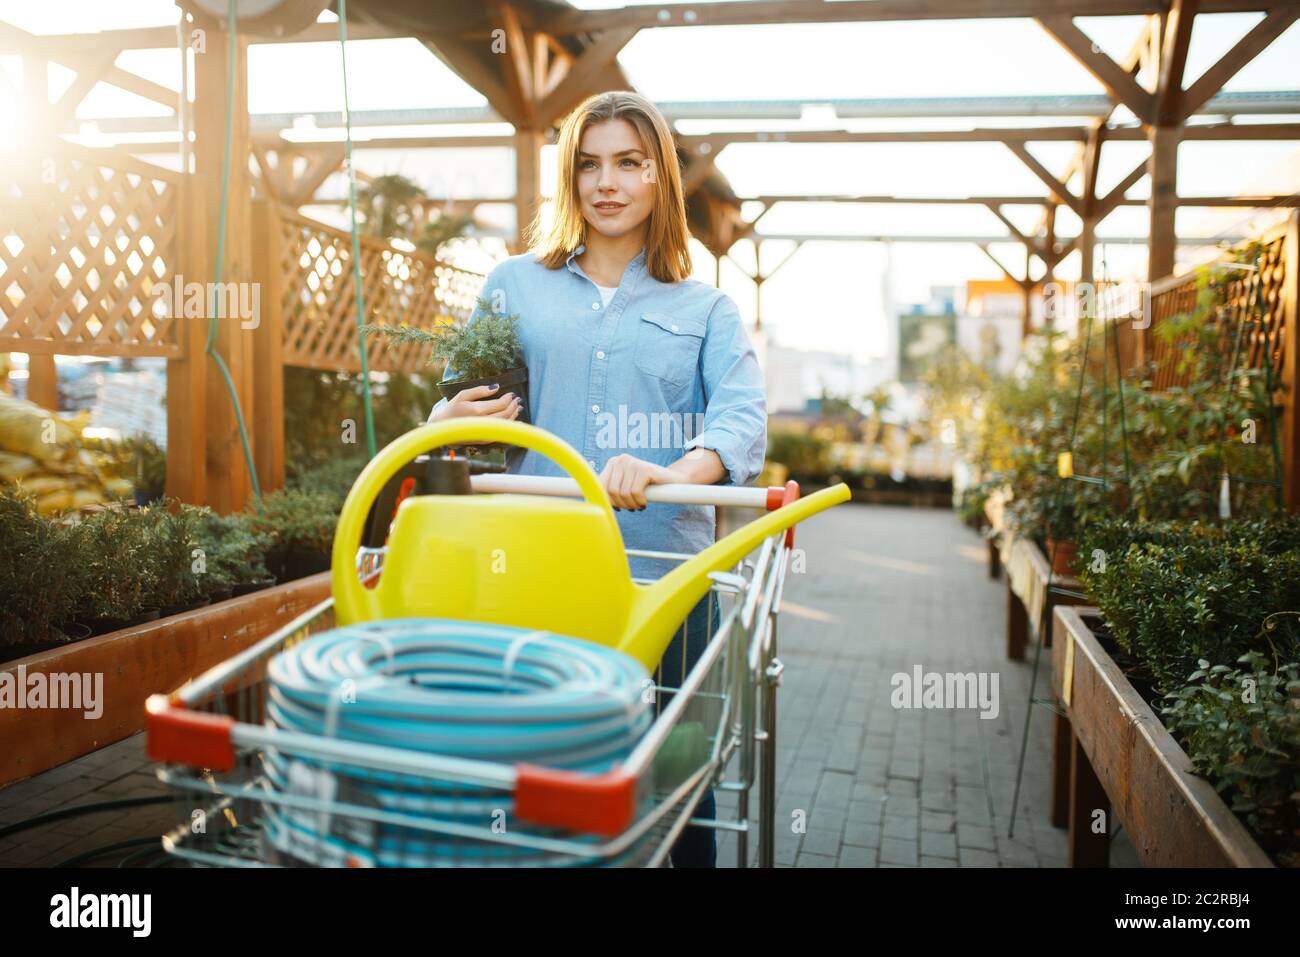 Female customer buying gardening tools, shop for floristry. Woman choosing equipment in store for floriculture, florist instrument purchasing, gardeni Stock Photo